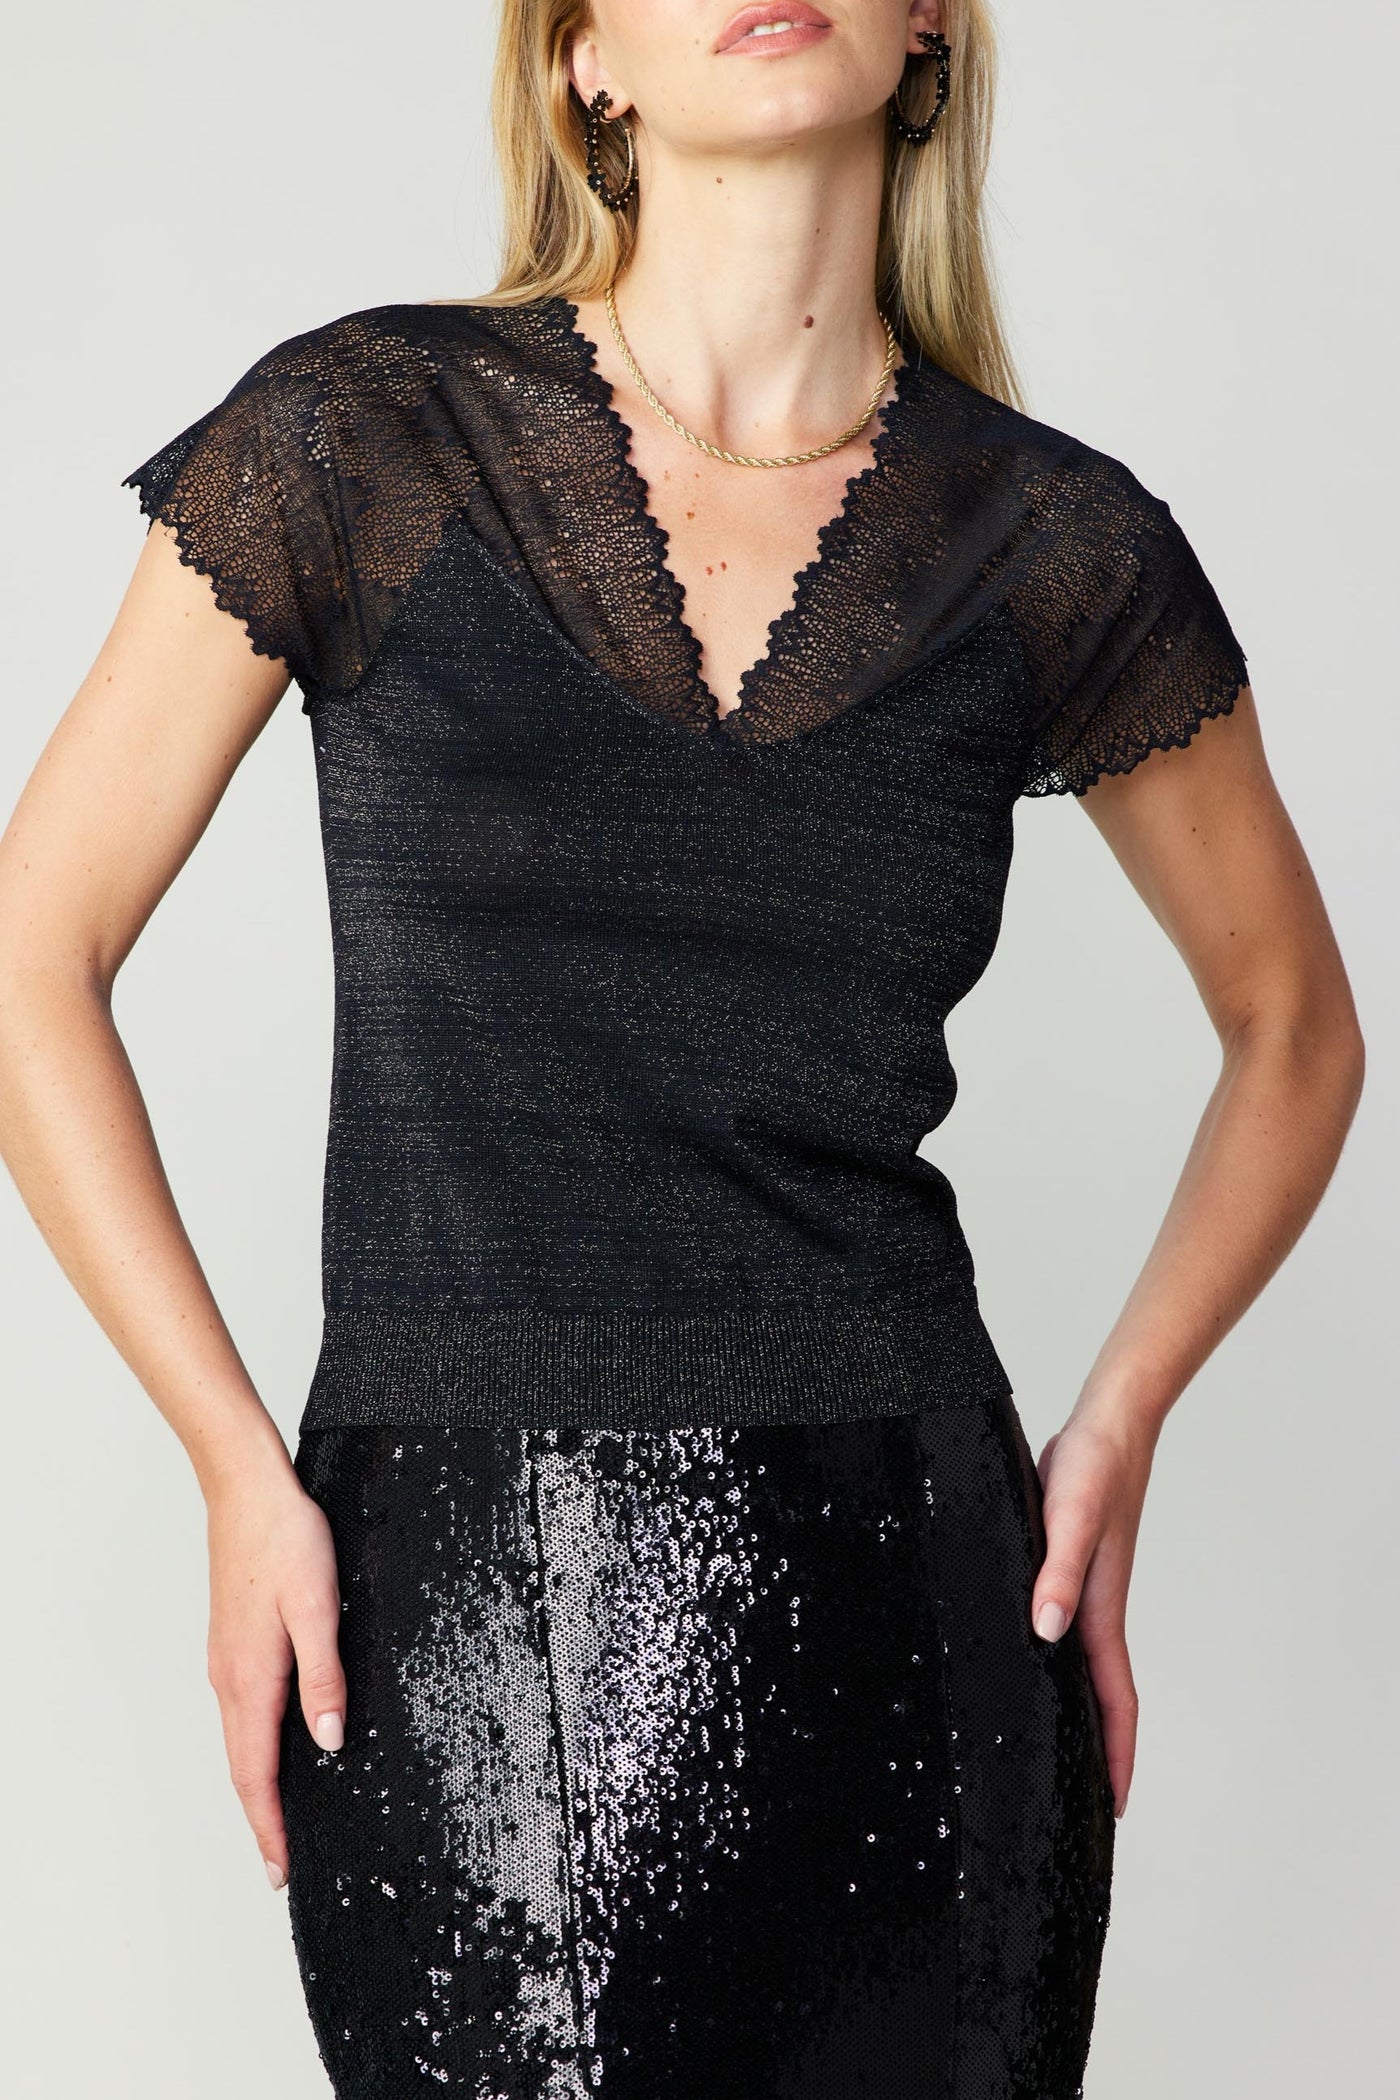 Silver Metallic/Lace Contrast Knit Top